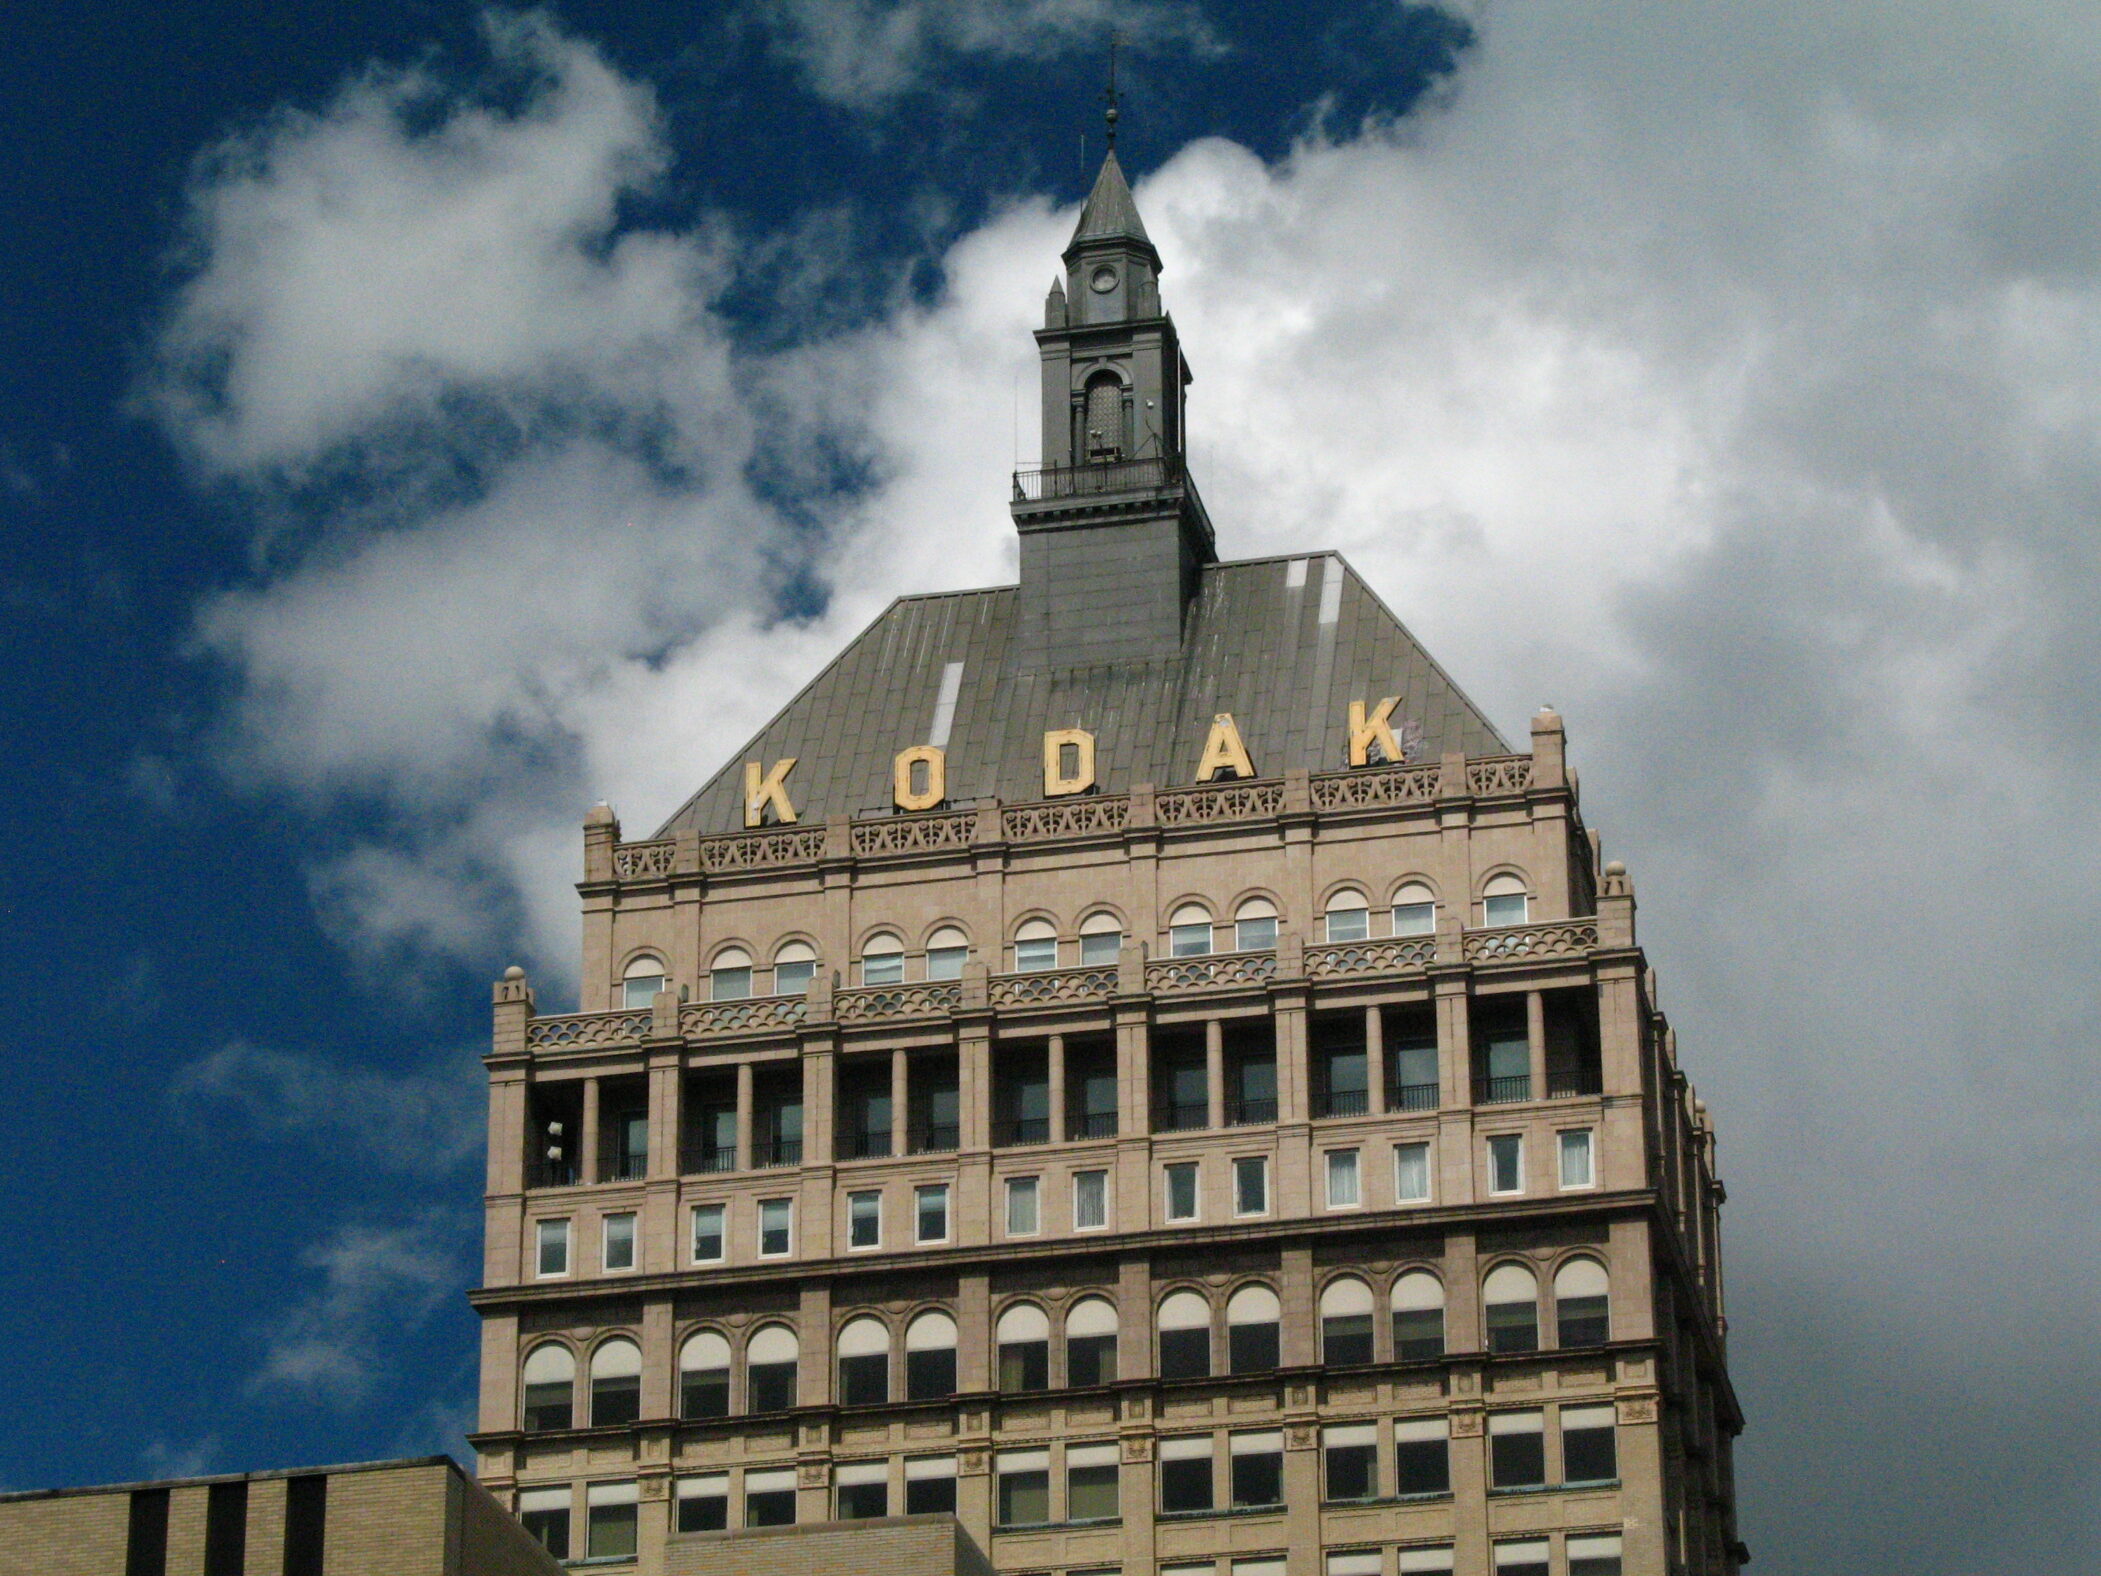 Closure of the Kodak plant in Rochester, United States lessons from